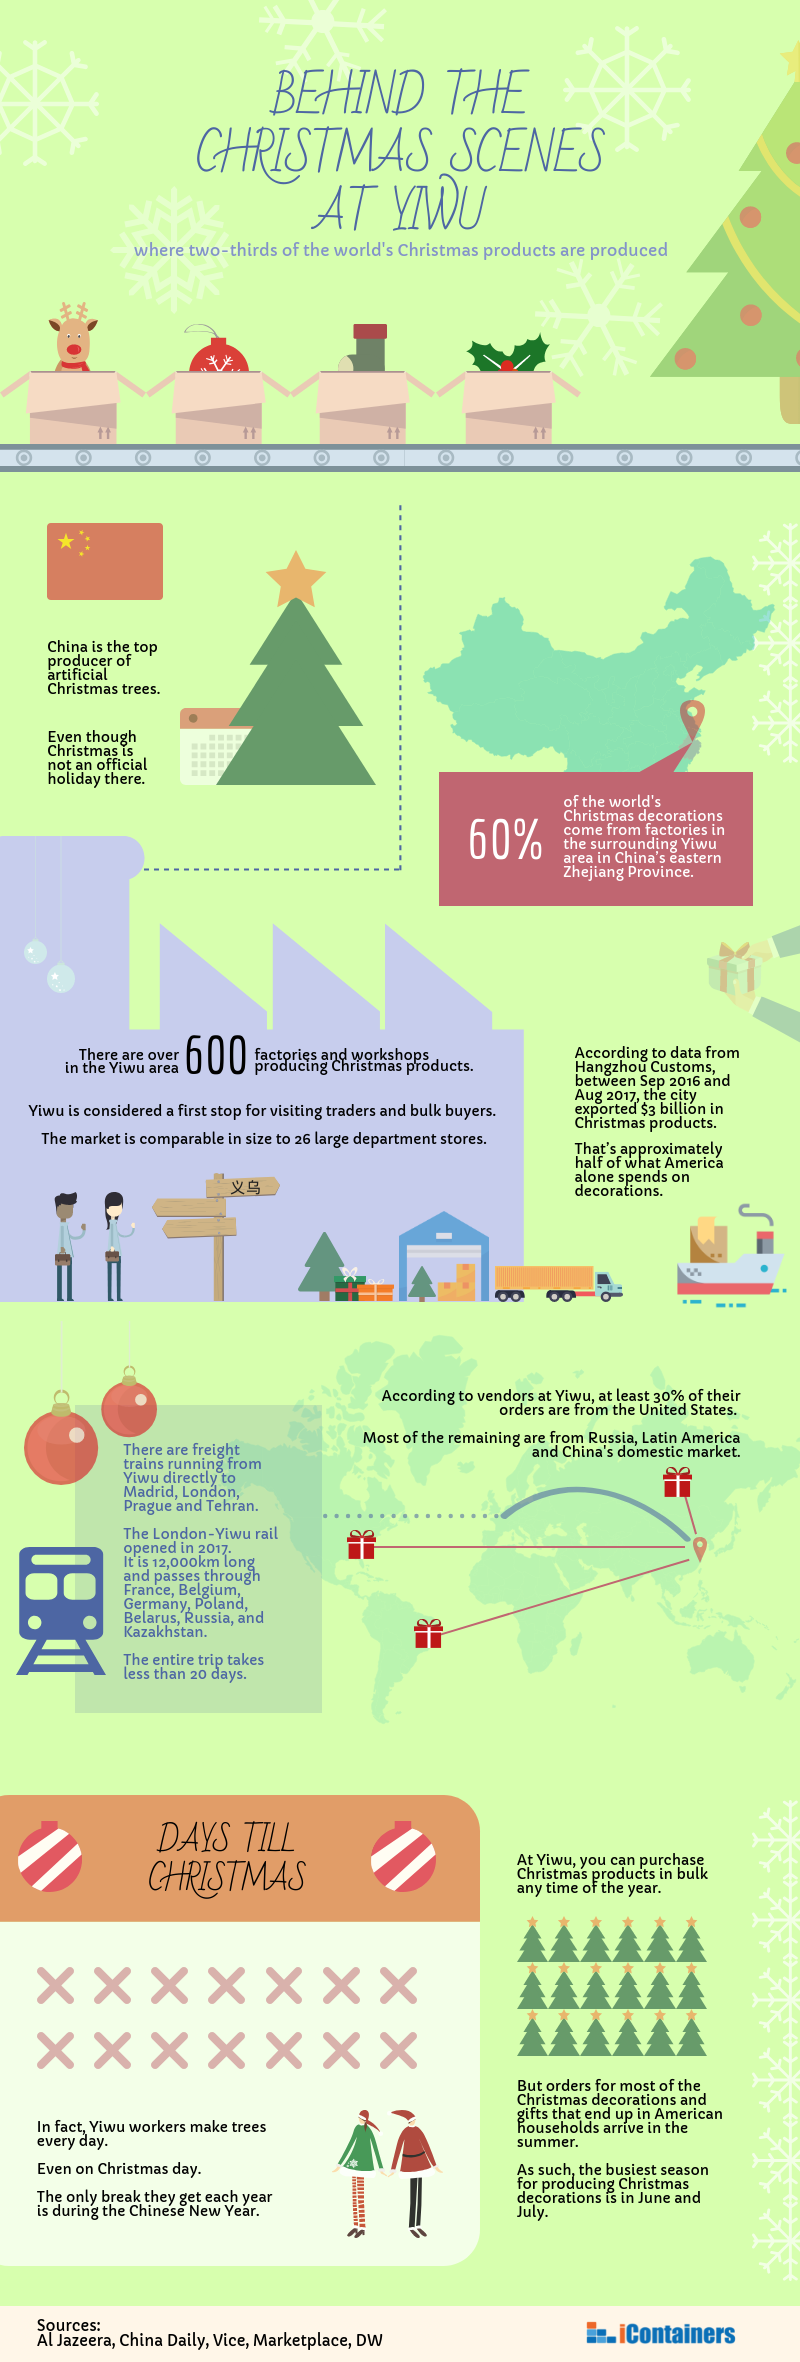 christmas-at-yiwu-infographic.png